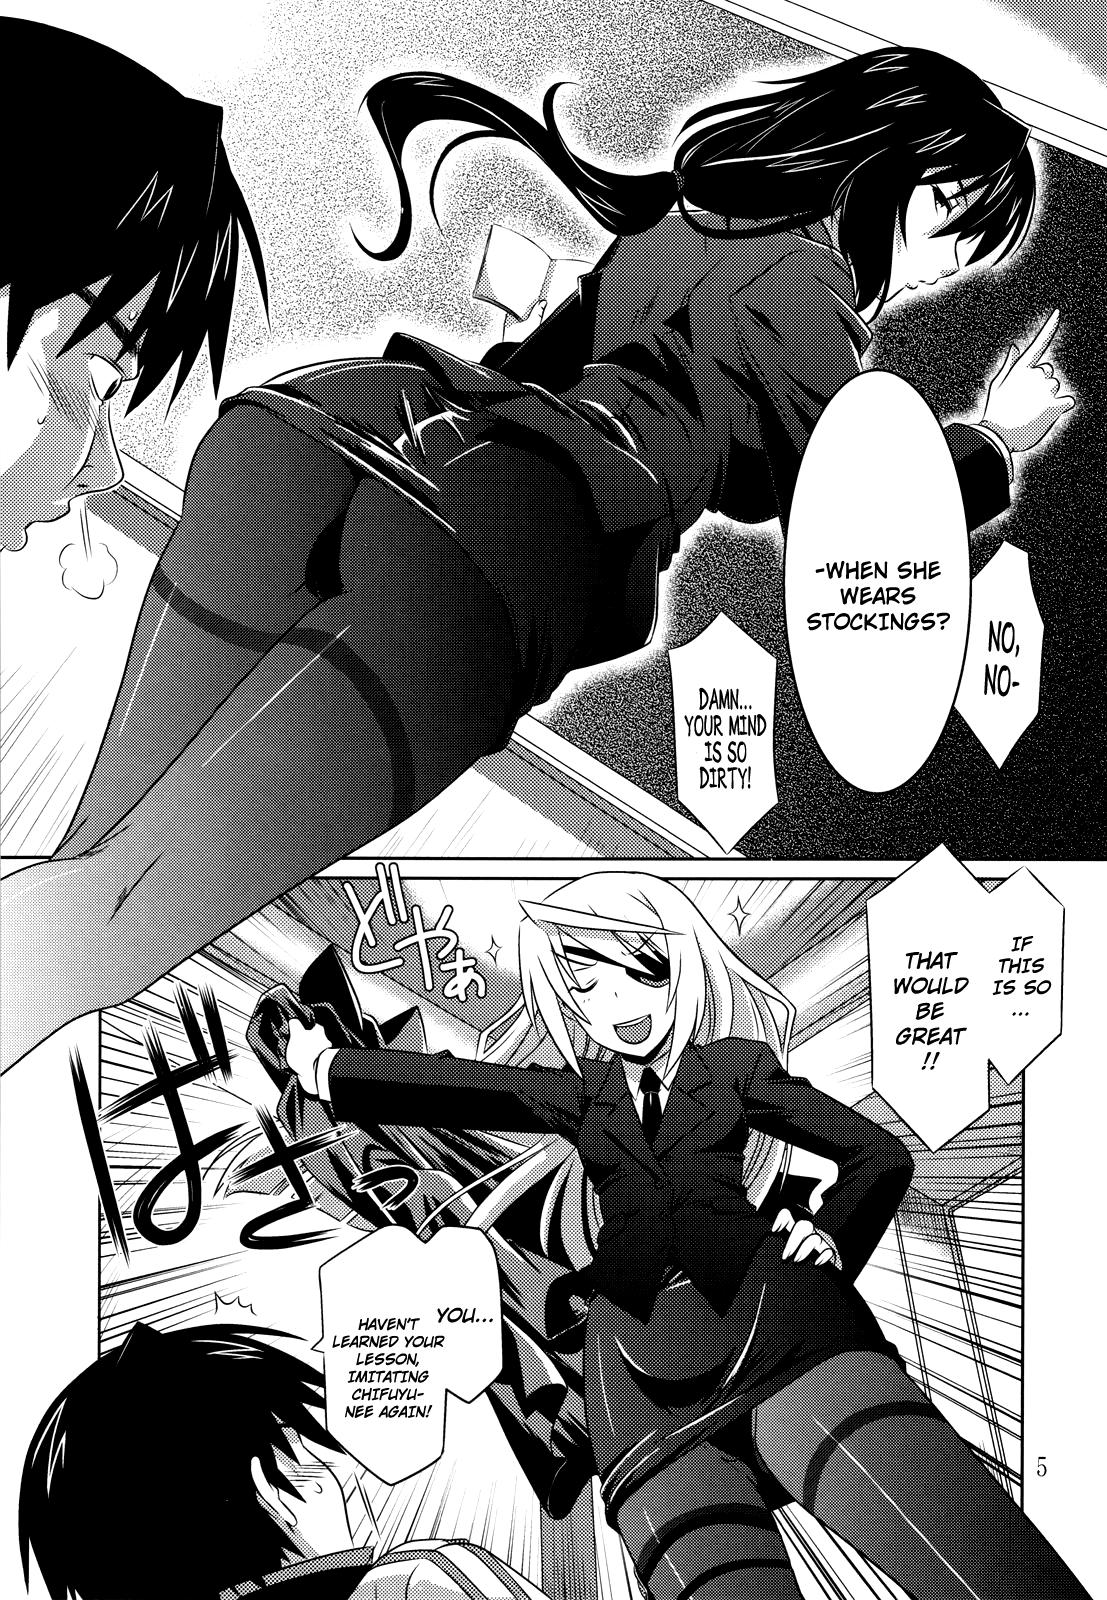 Pervs is Incest Strategy 2 - Infinite stratos Hardcore Porn Free - Page 4